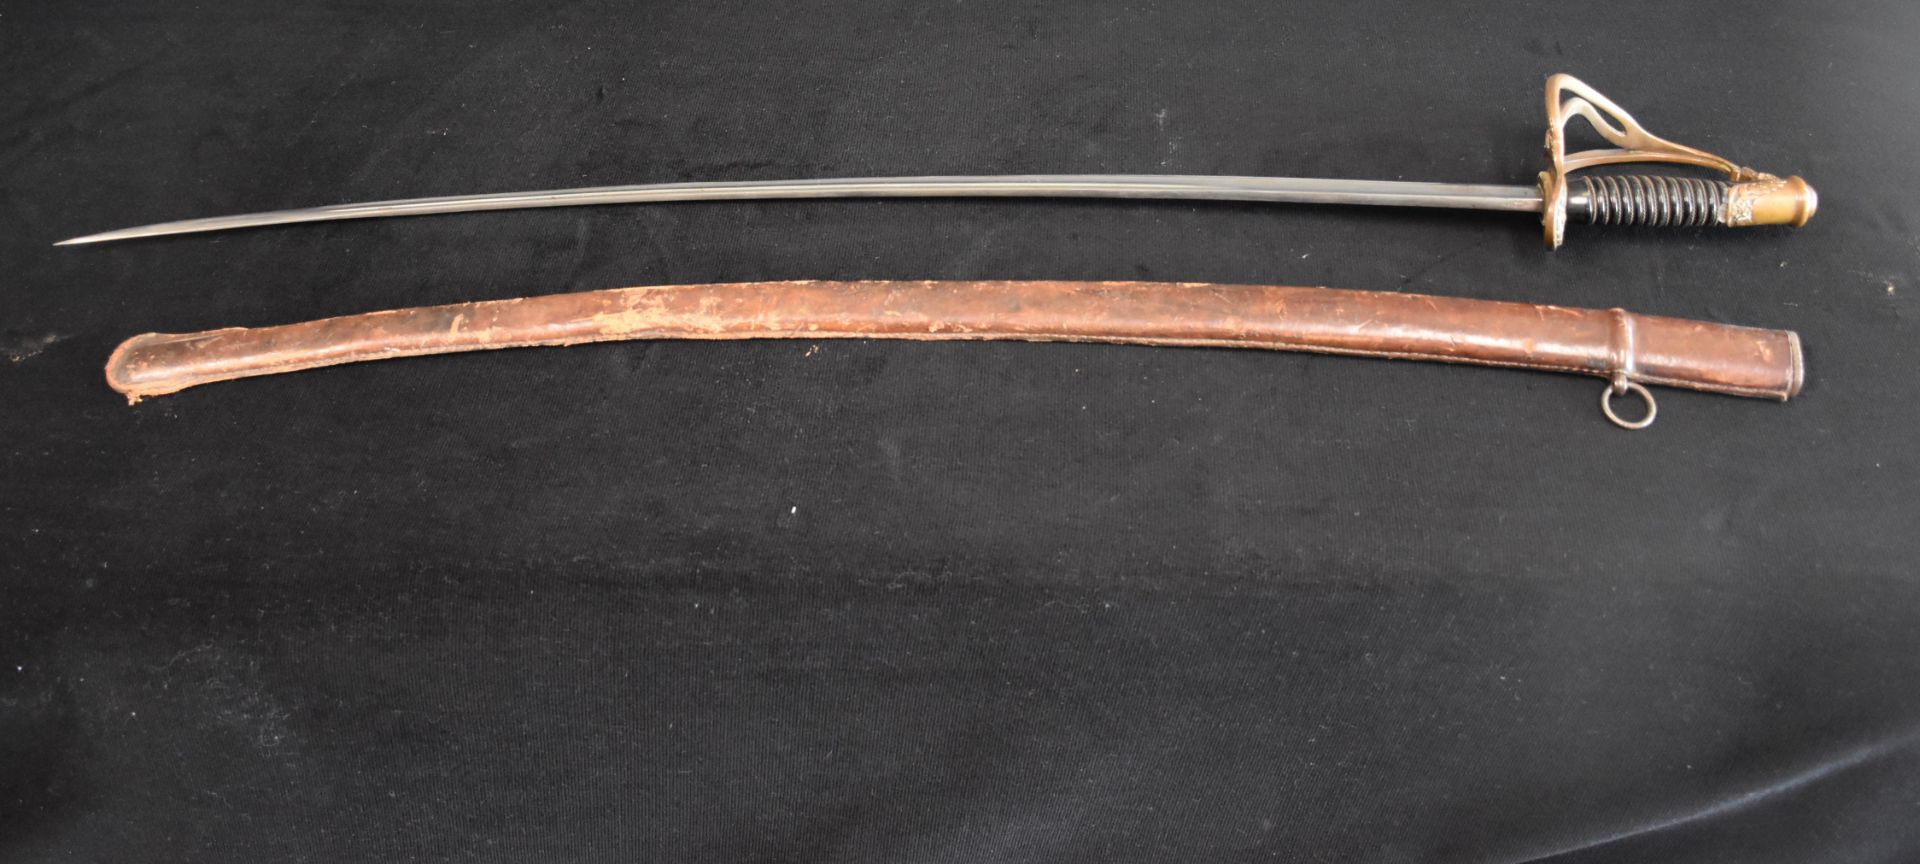 19th century French Saber, Saint Etienne, leather scabbard. - Image 6 of 6